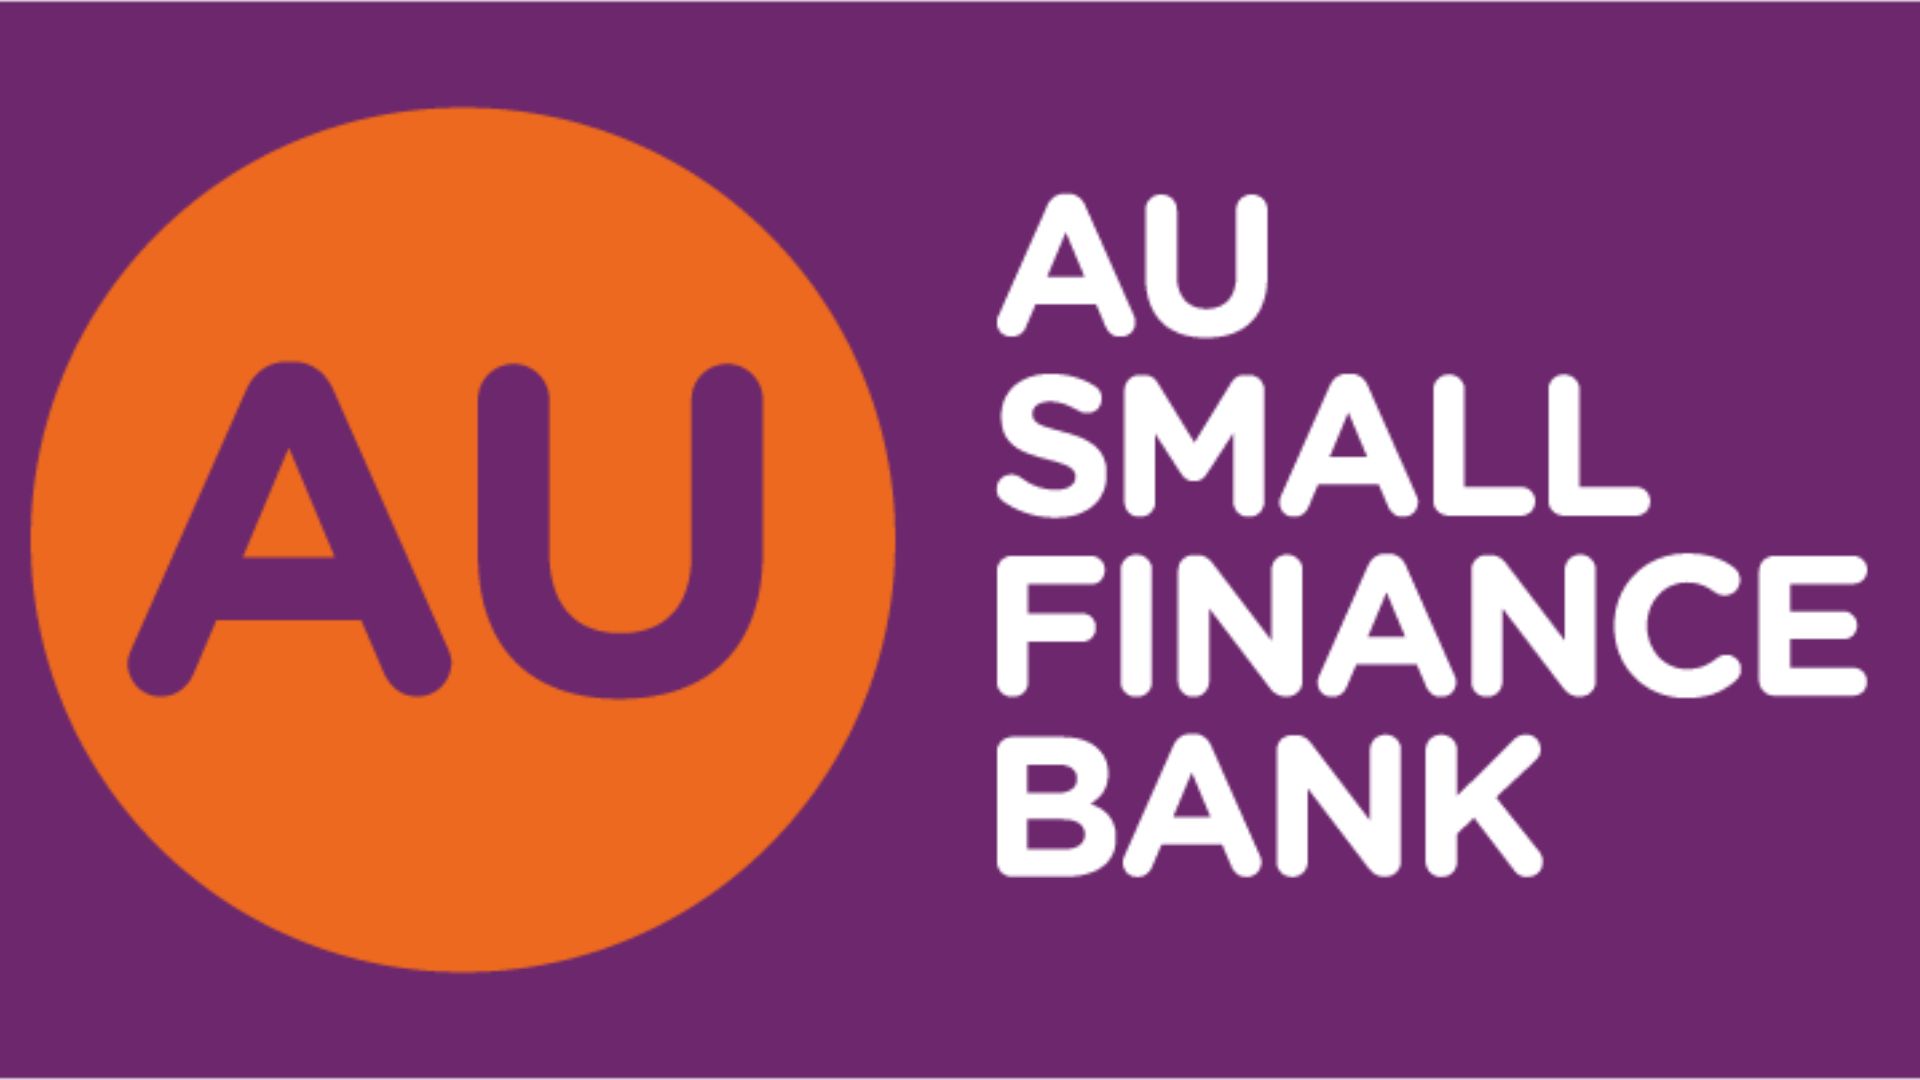 AU Small Finance Bank Spearheads Digital Revolution in India with 24×7 Video Banking